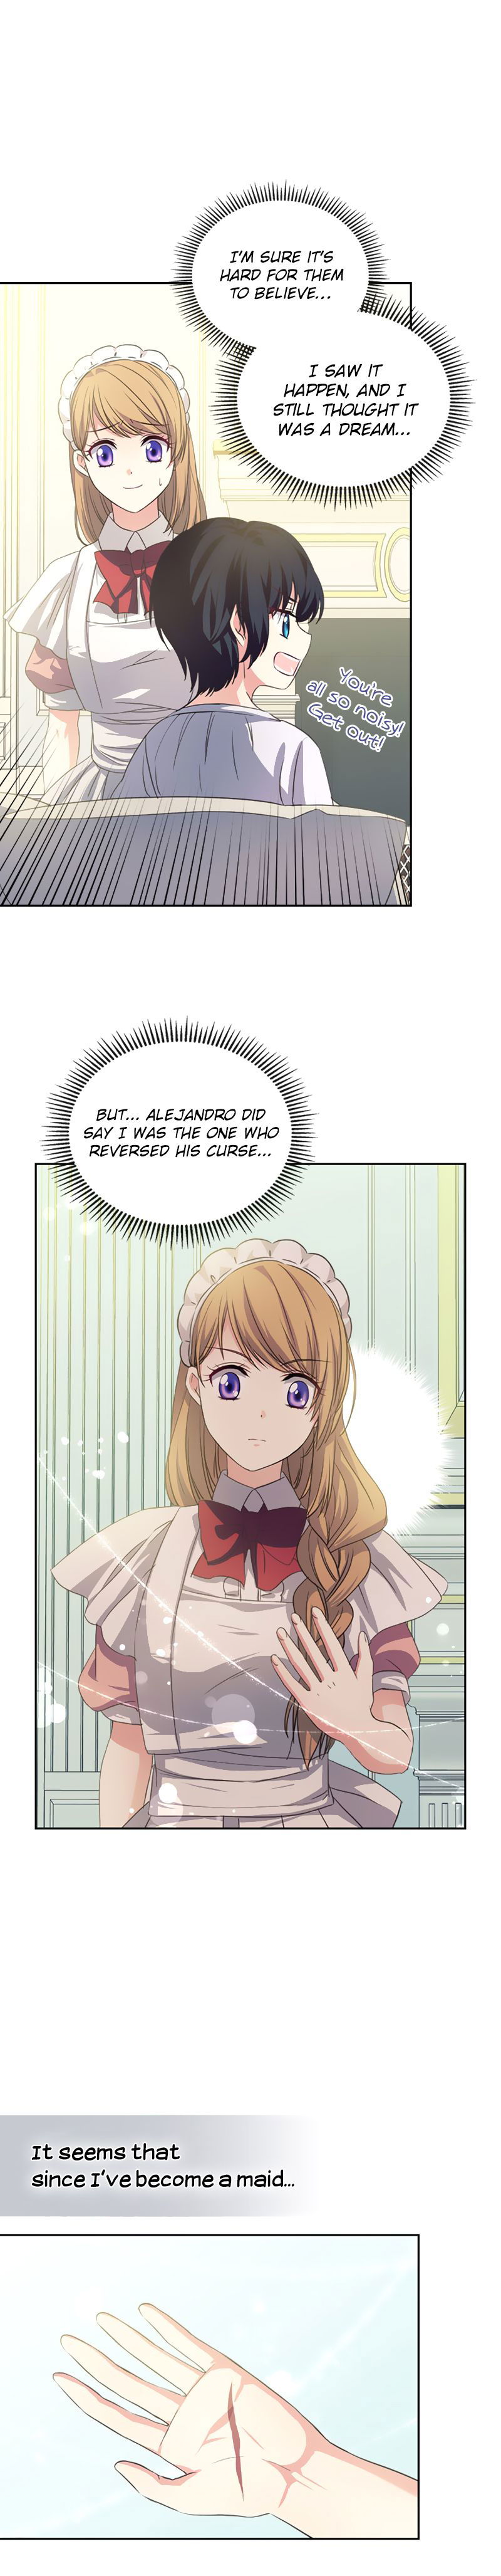 Sincerely: I Became a Duke's Maid Chapter 22 page 5